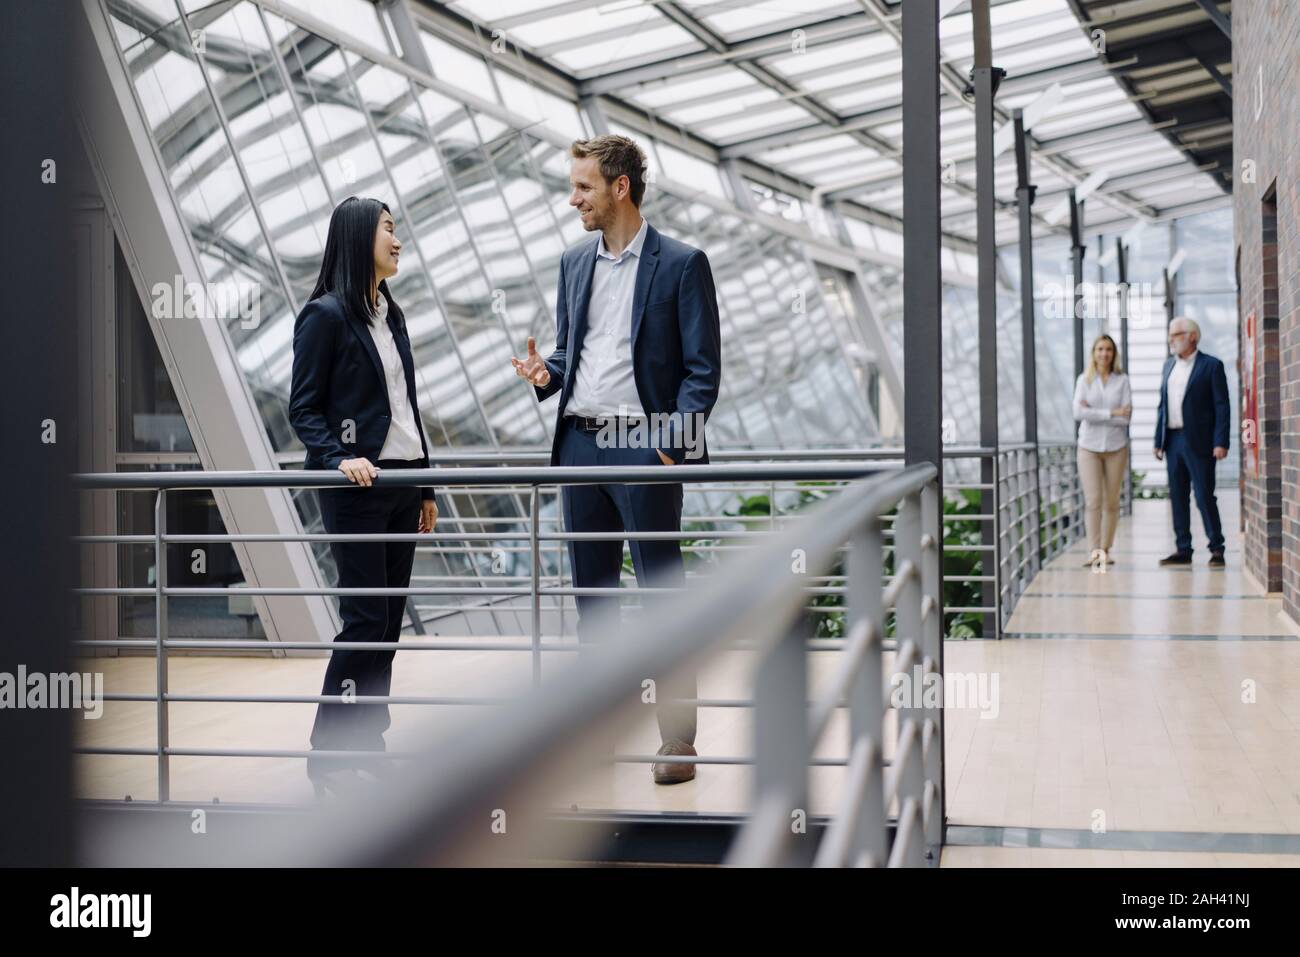 Business people talking in modern office building Stock Photo